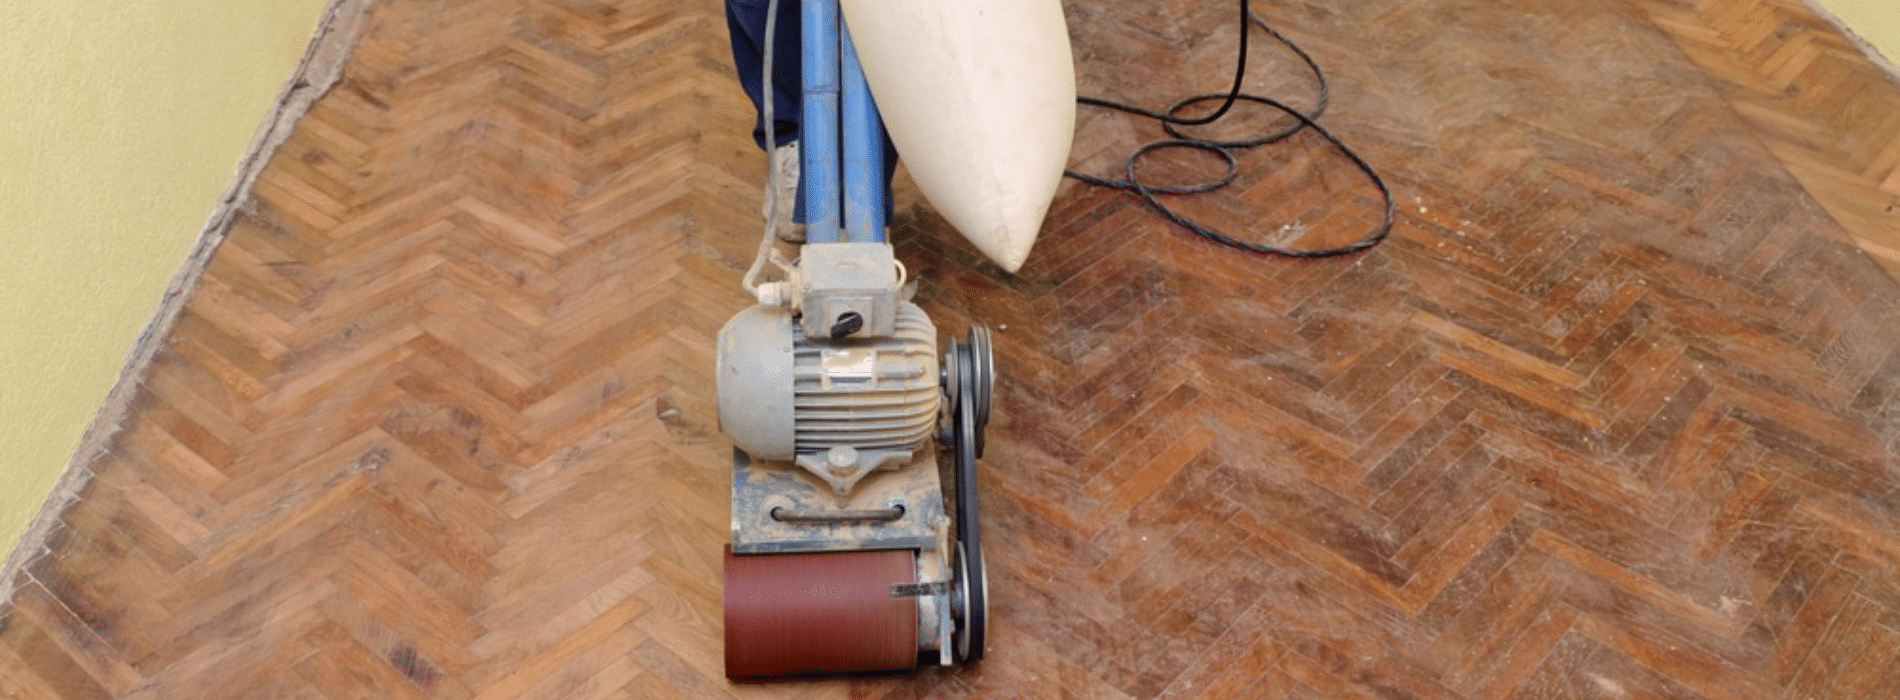 In Whitechapel, E1, Mr Sander® use a Bona Belt Effect (2.2 kW) sander, operating at 230V and 50Hz/60Hz, to sand herringbone floors. The 250x750 mm sander, connected to a dust extraction system with a HEPA filter, ensures a clean and efficient result. 